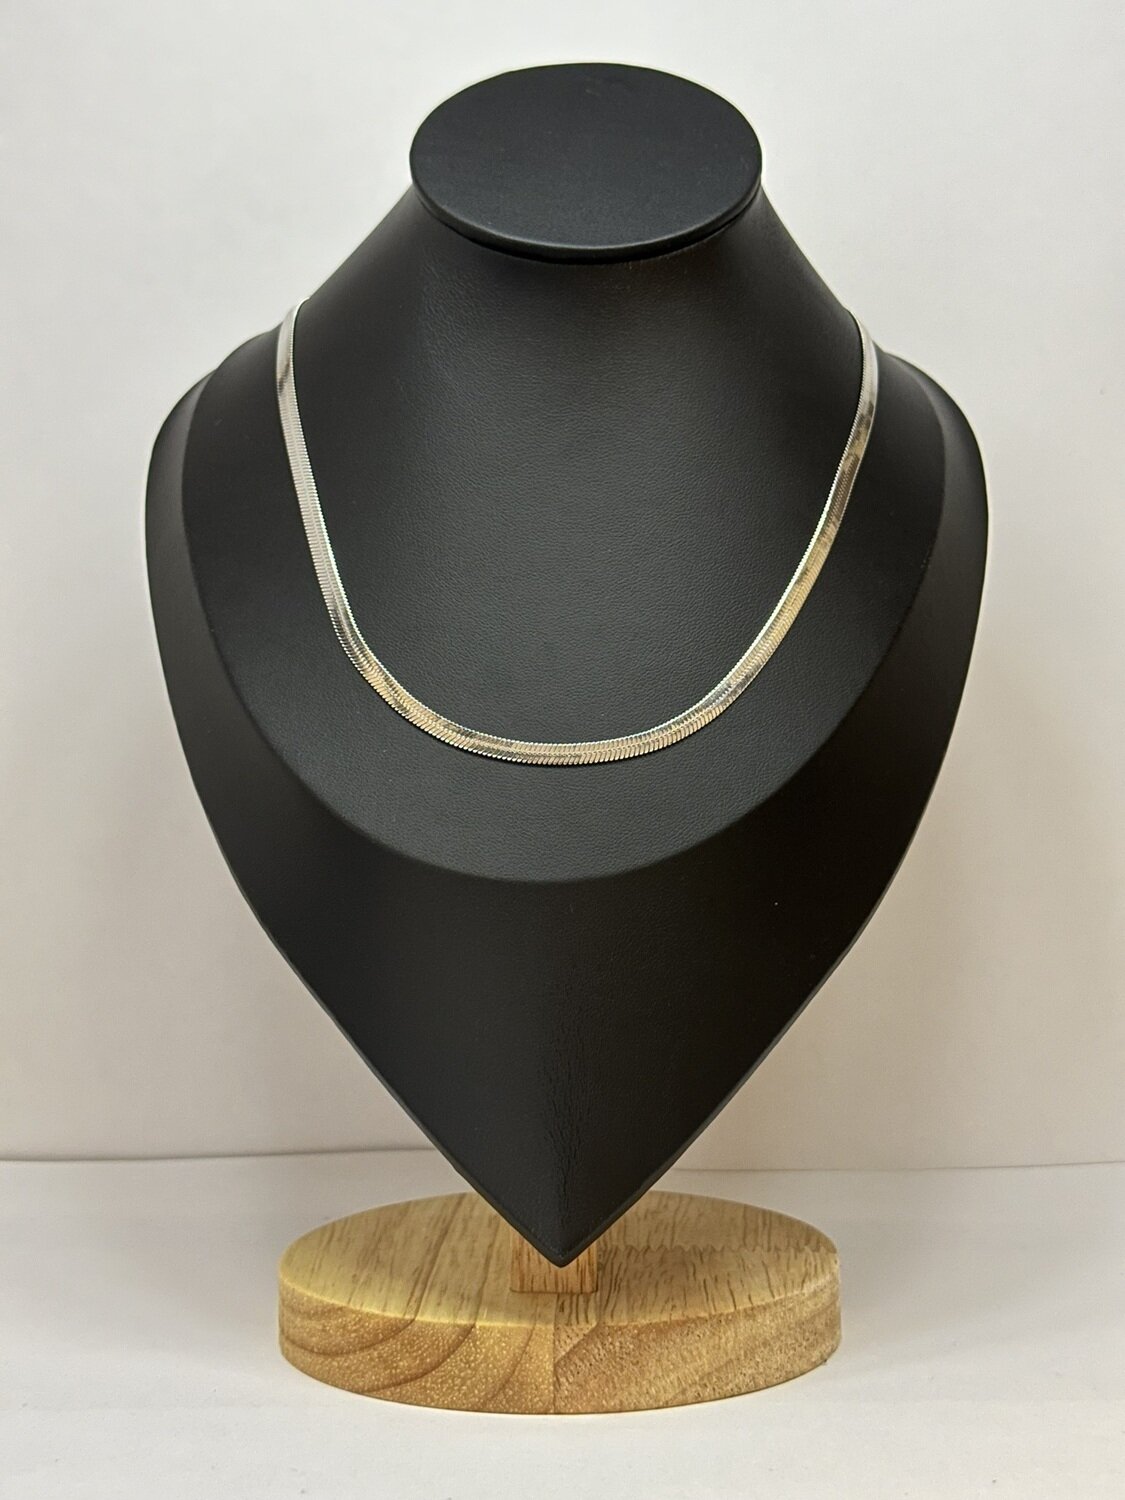 Stainless steel ketting